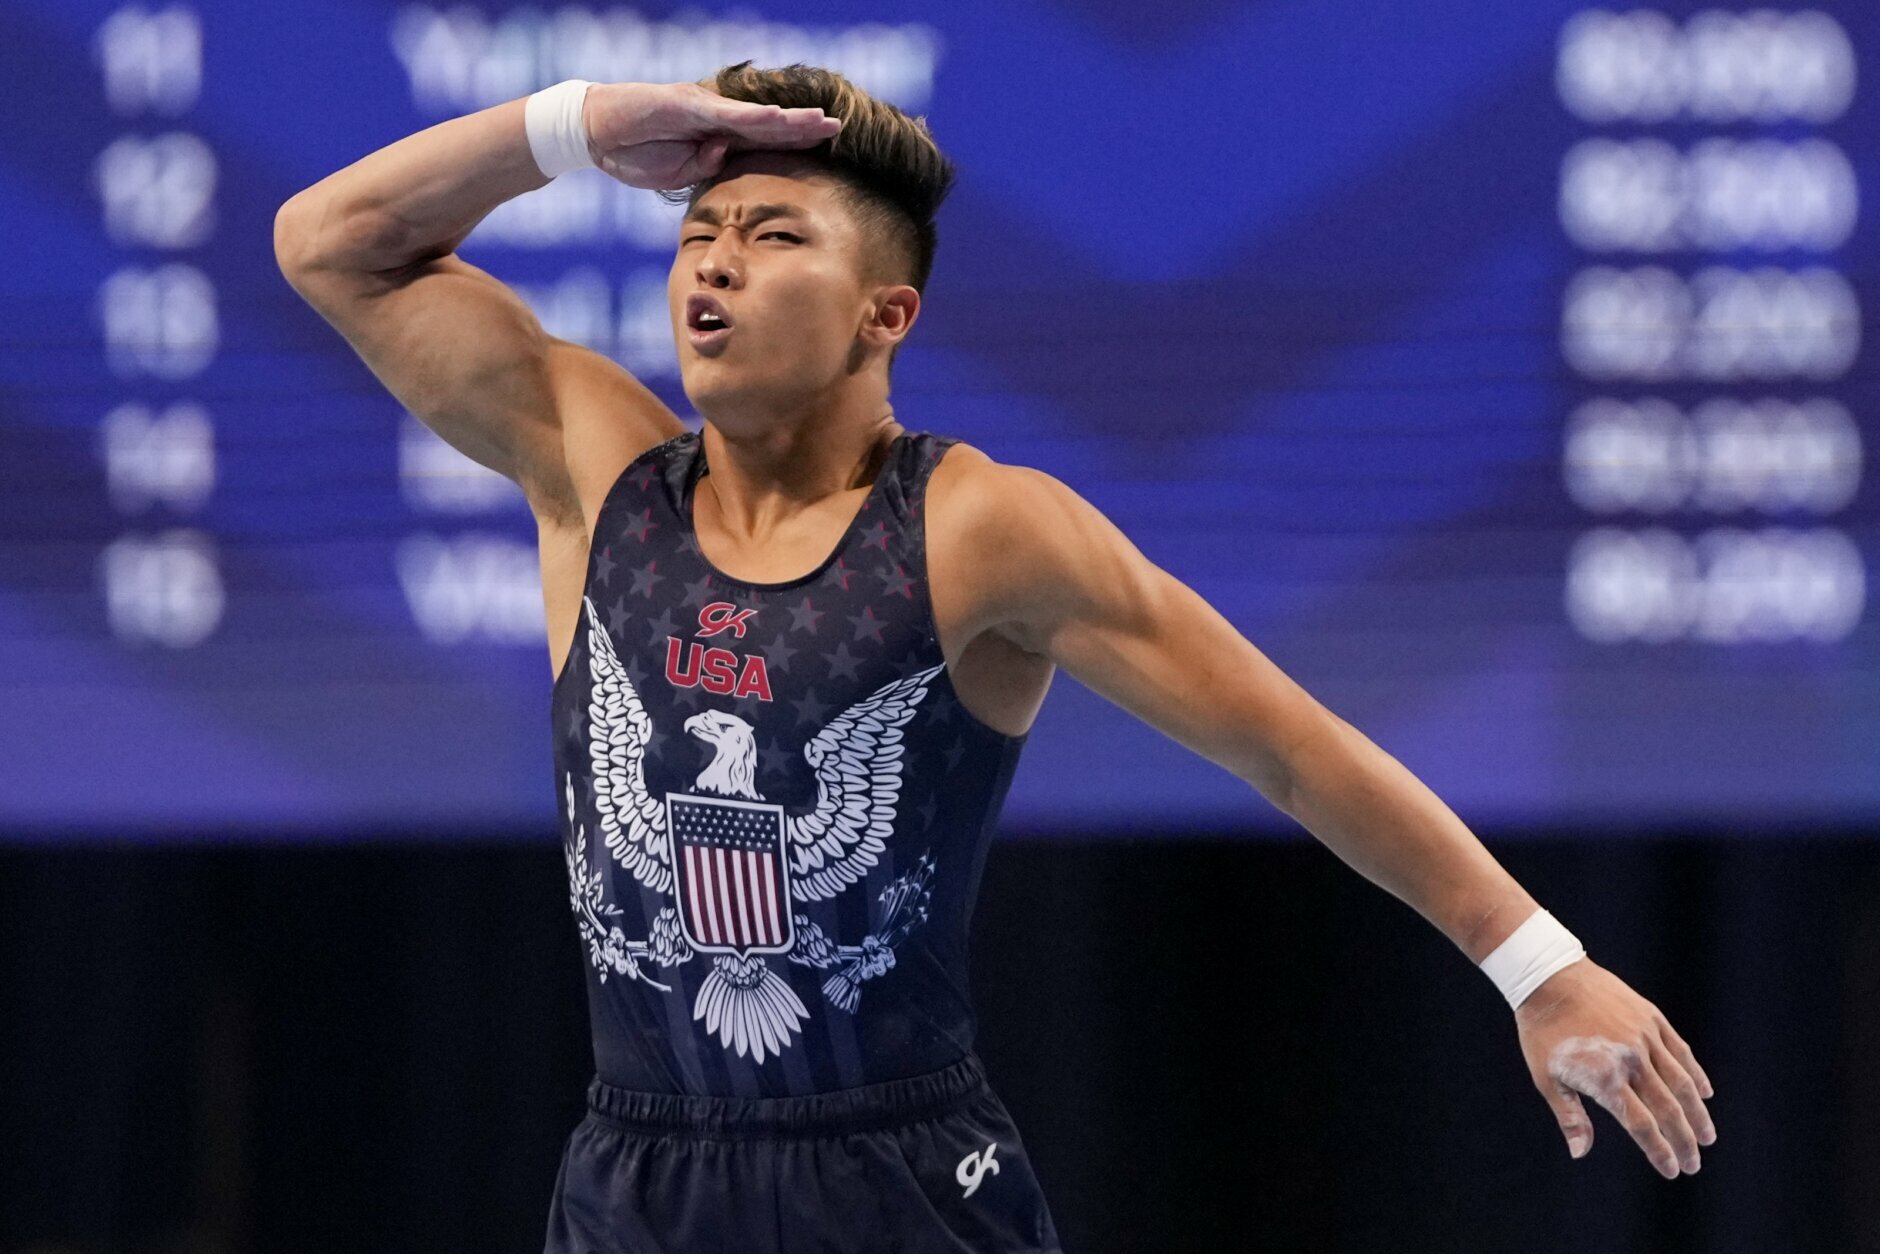 <p>Yul Moldauer celebrates his performance in the floor exercise during the men&#8217;s U.S. Olympic Gymnastics Trials Saturday, June 26, 2021, in St. Louis.</p>
